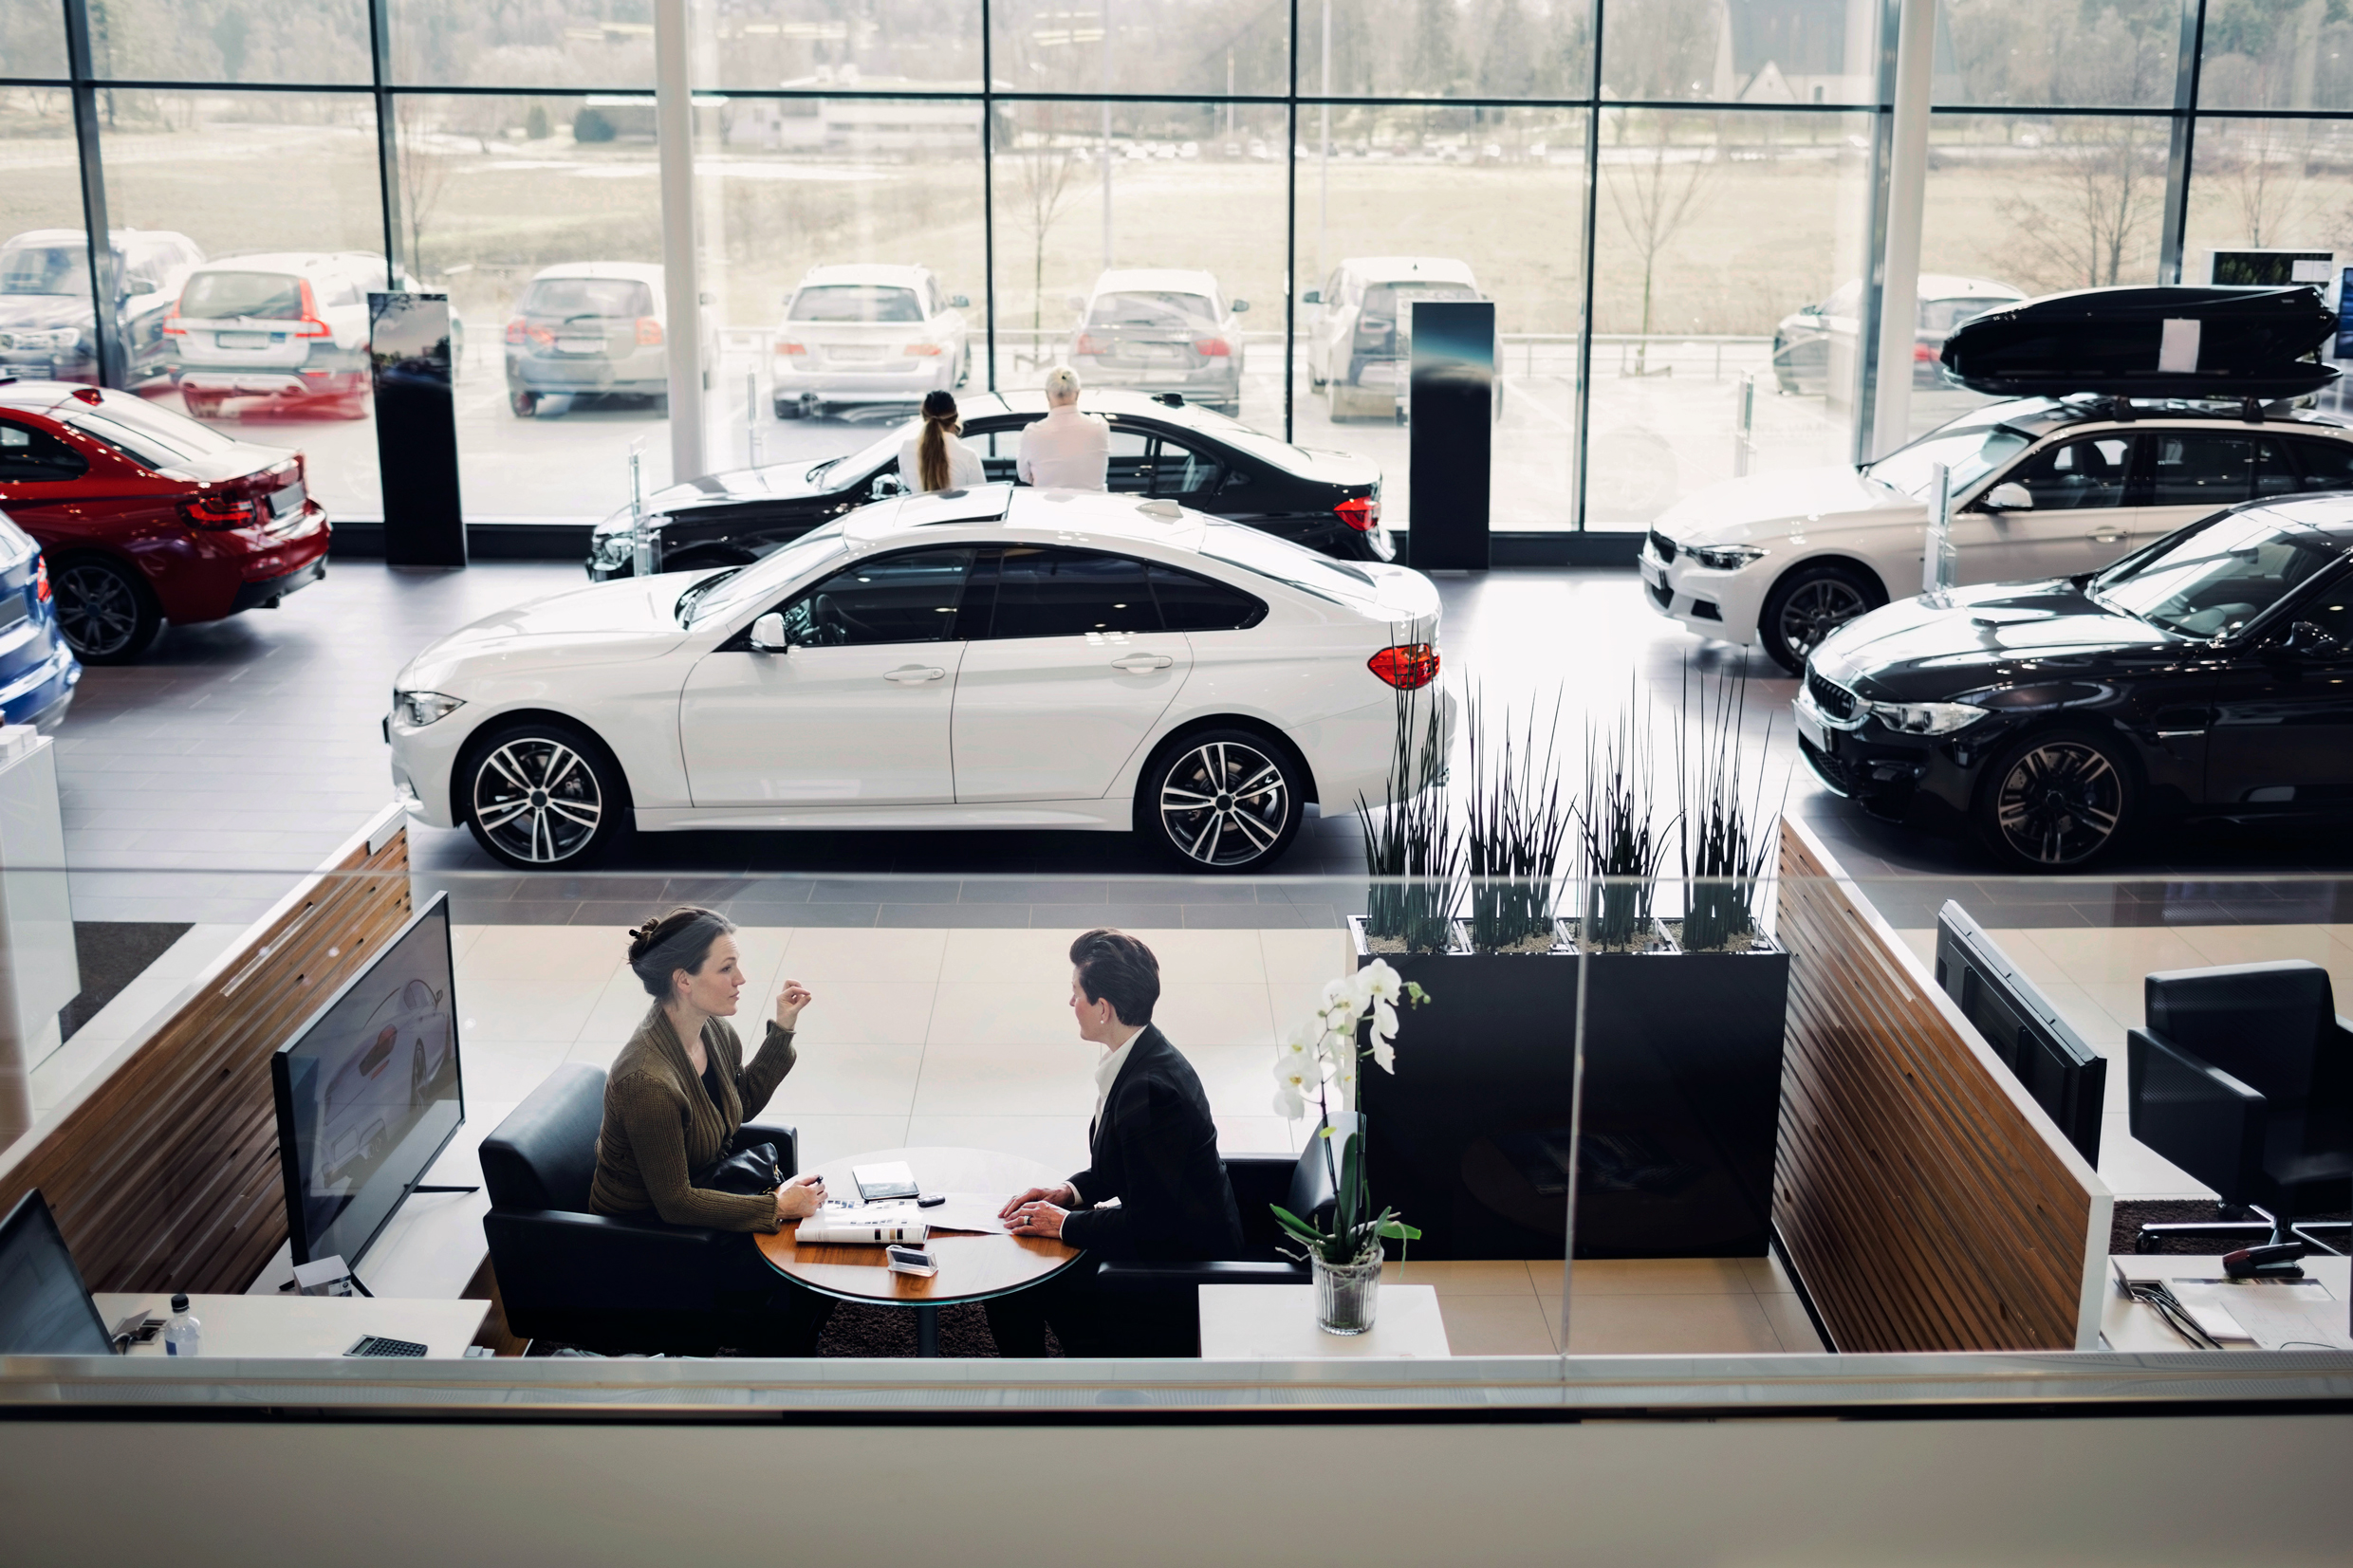 Auto Lenders Offer Very Different Rates to Similar Borrowers